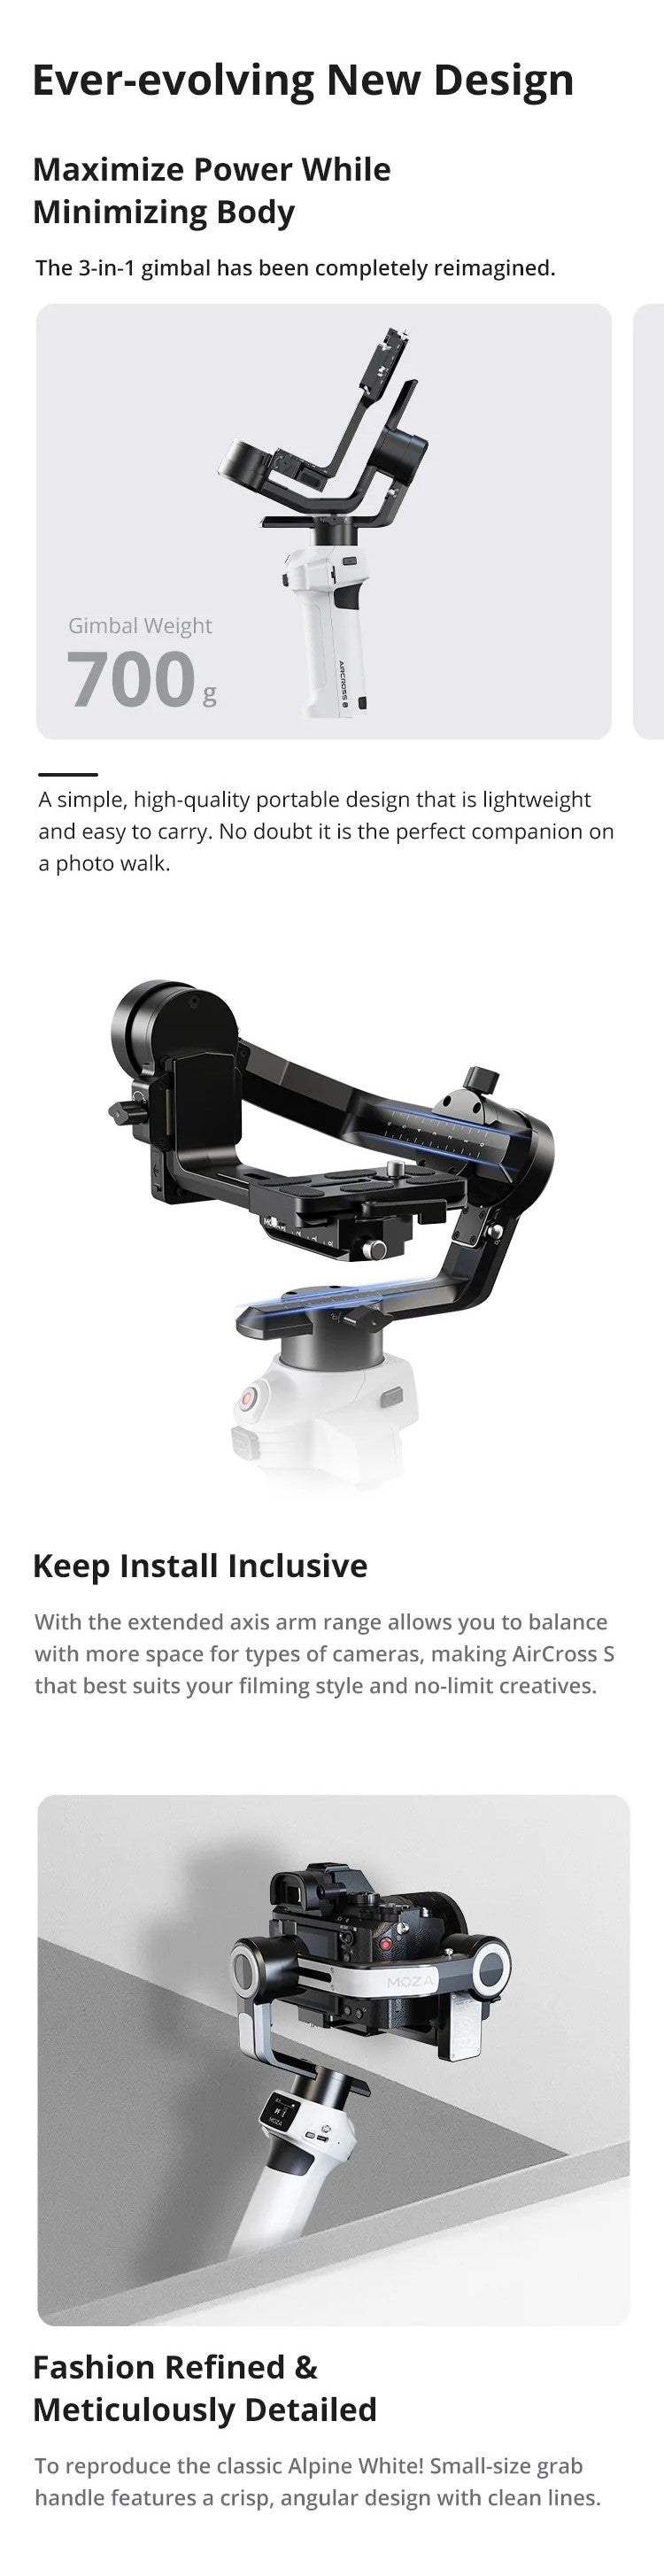 MOZA AirCross S 3-Axis Camera Gimbal Stabilizer